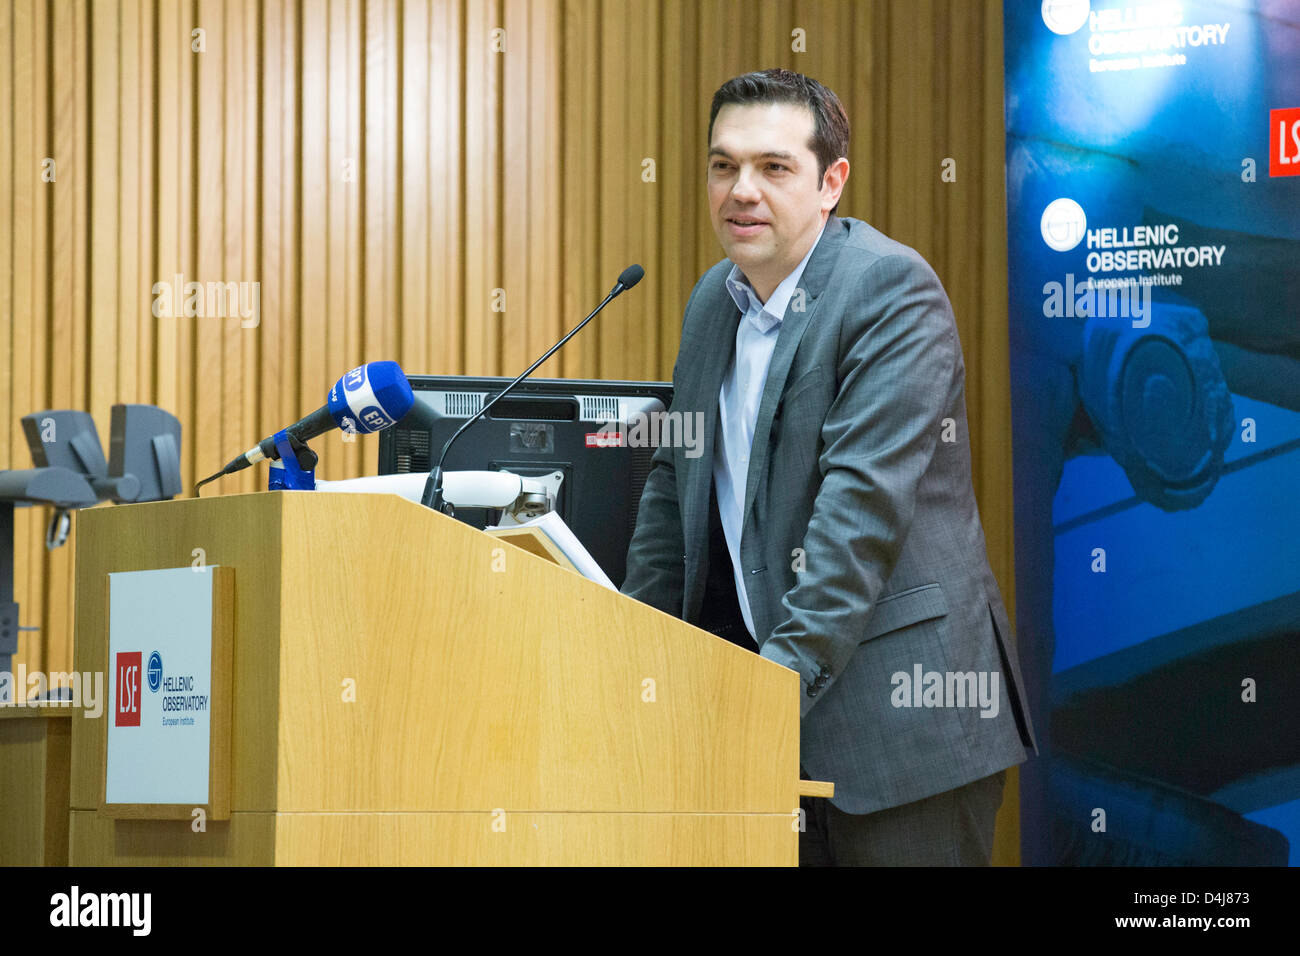 London, UK. 14 March 2013.  Mr Aleksis Tsipras leader of the official greek opposition party  gave a speech at the LSE campus in Holborn with title 'Greece's way out of crisis' Mr Tsipras spoke about the ways in which Greece can overcome the financial crisis as well as the role and political goals of the contemporary left. Credit: Lydia Pagoni / Alamy Live News Stock Photo